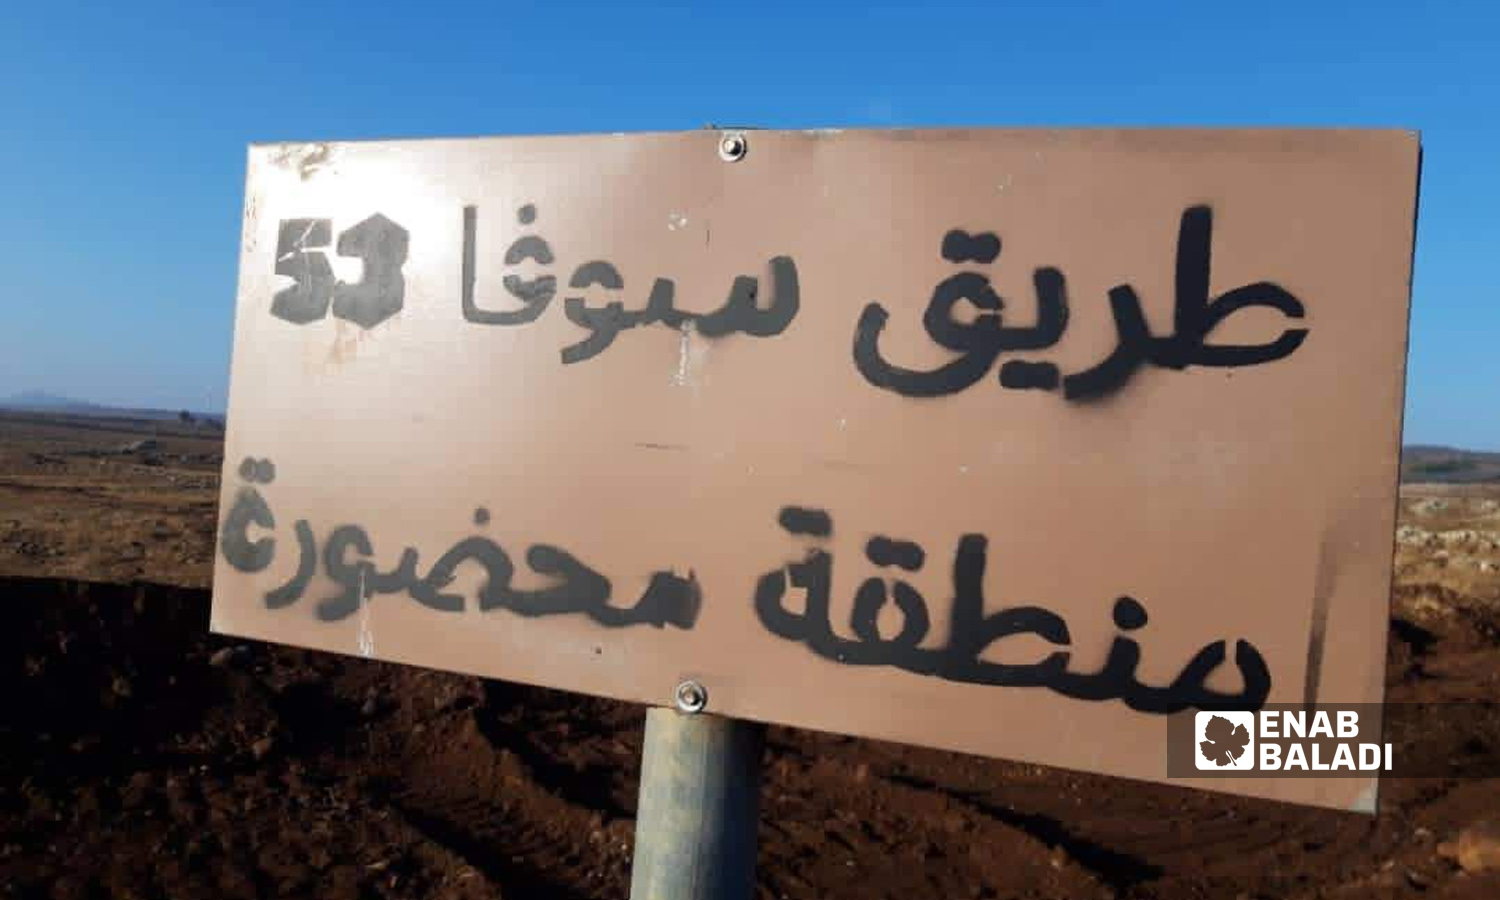 A warning sign board installed by the Israeli forces inside the Syrian territory near the borders connecting with it - 8 January 2022 (Enab Baladi/Zain al-Jolani)